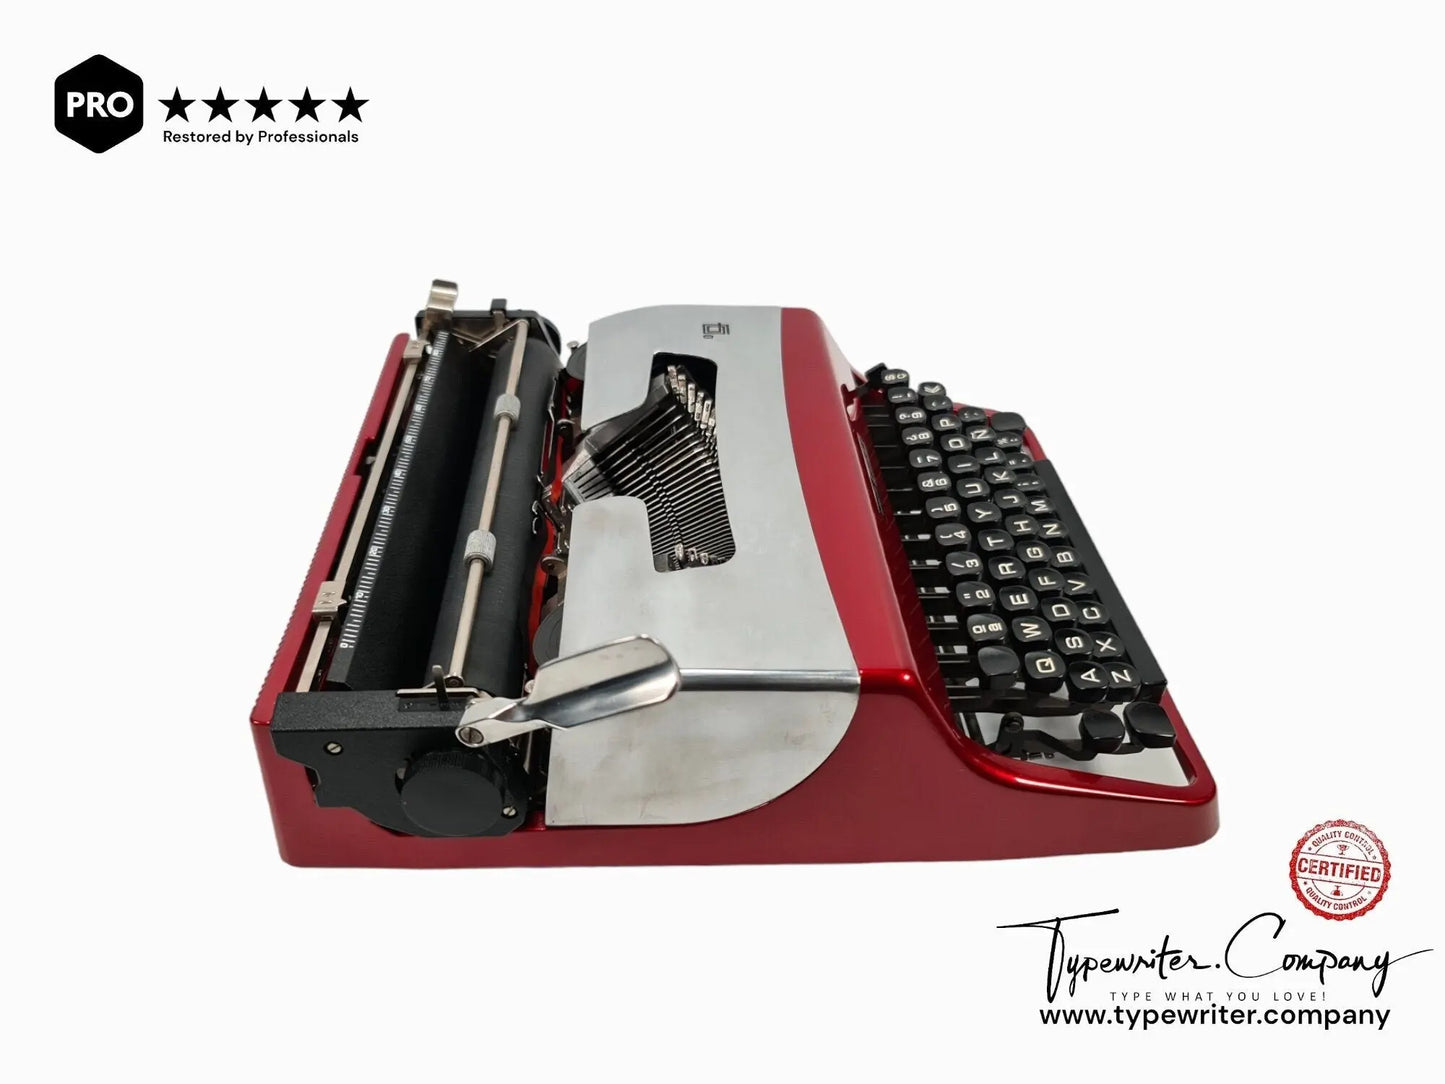 Limited Edition Olivetti Lettera 32 Silver & Red Typewriter, Vintage, Manual Portable, Professionally Serviced by Typewriter.Company - ElGranero Typewriter.Company